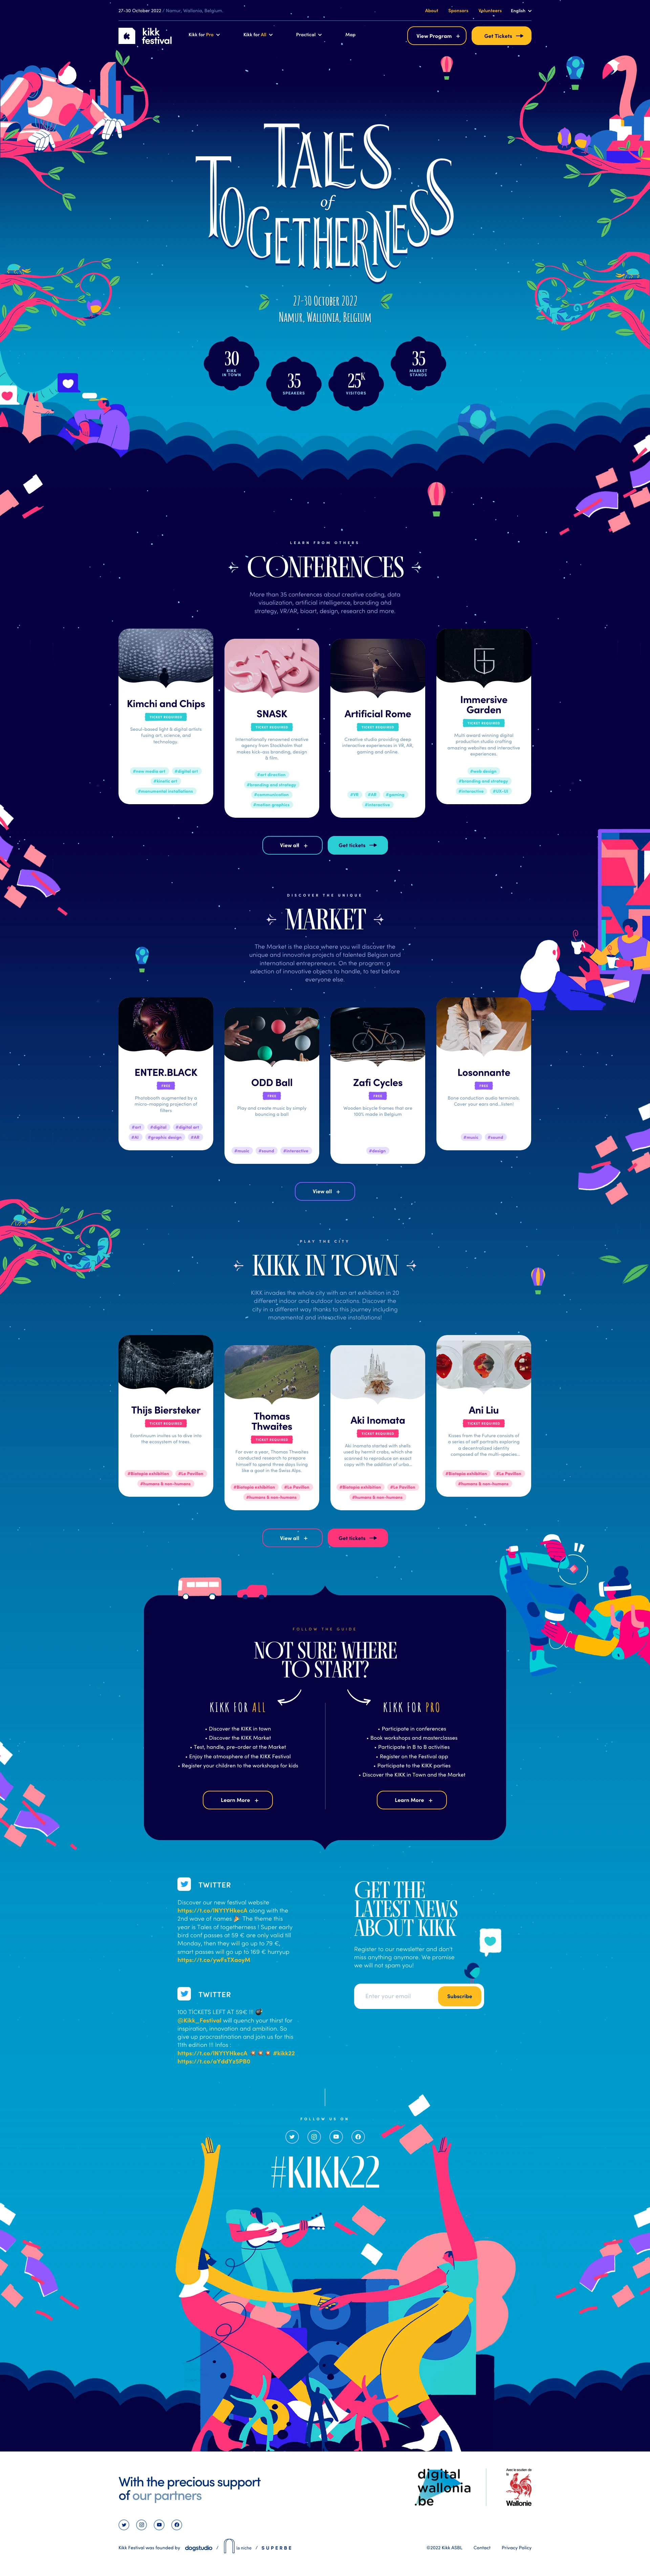 KIKK Festival 2022 Landing Page Example: International festival of digital & creative cultures exploring the crossovers between art, science & technology.